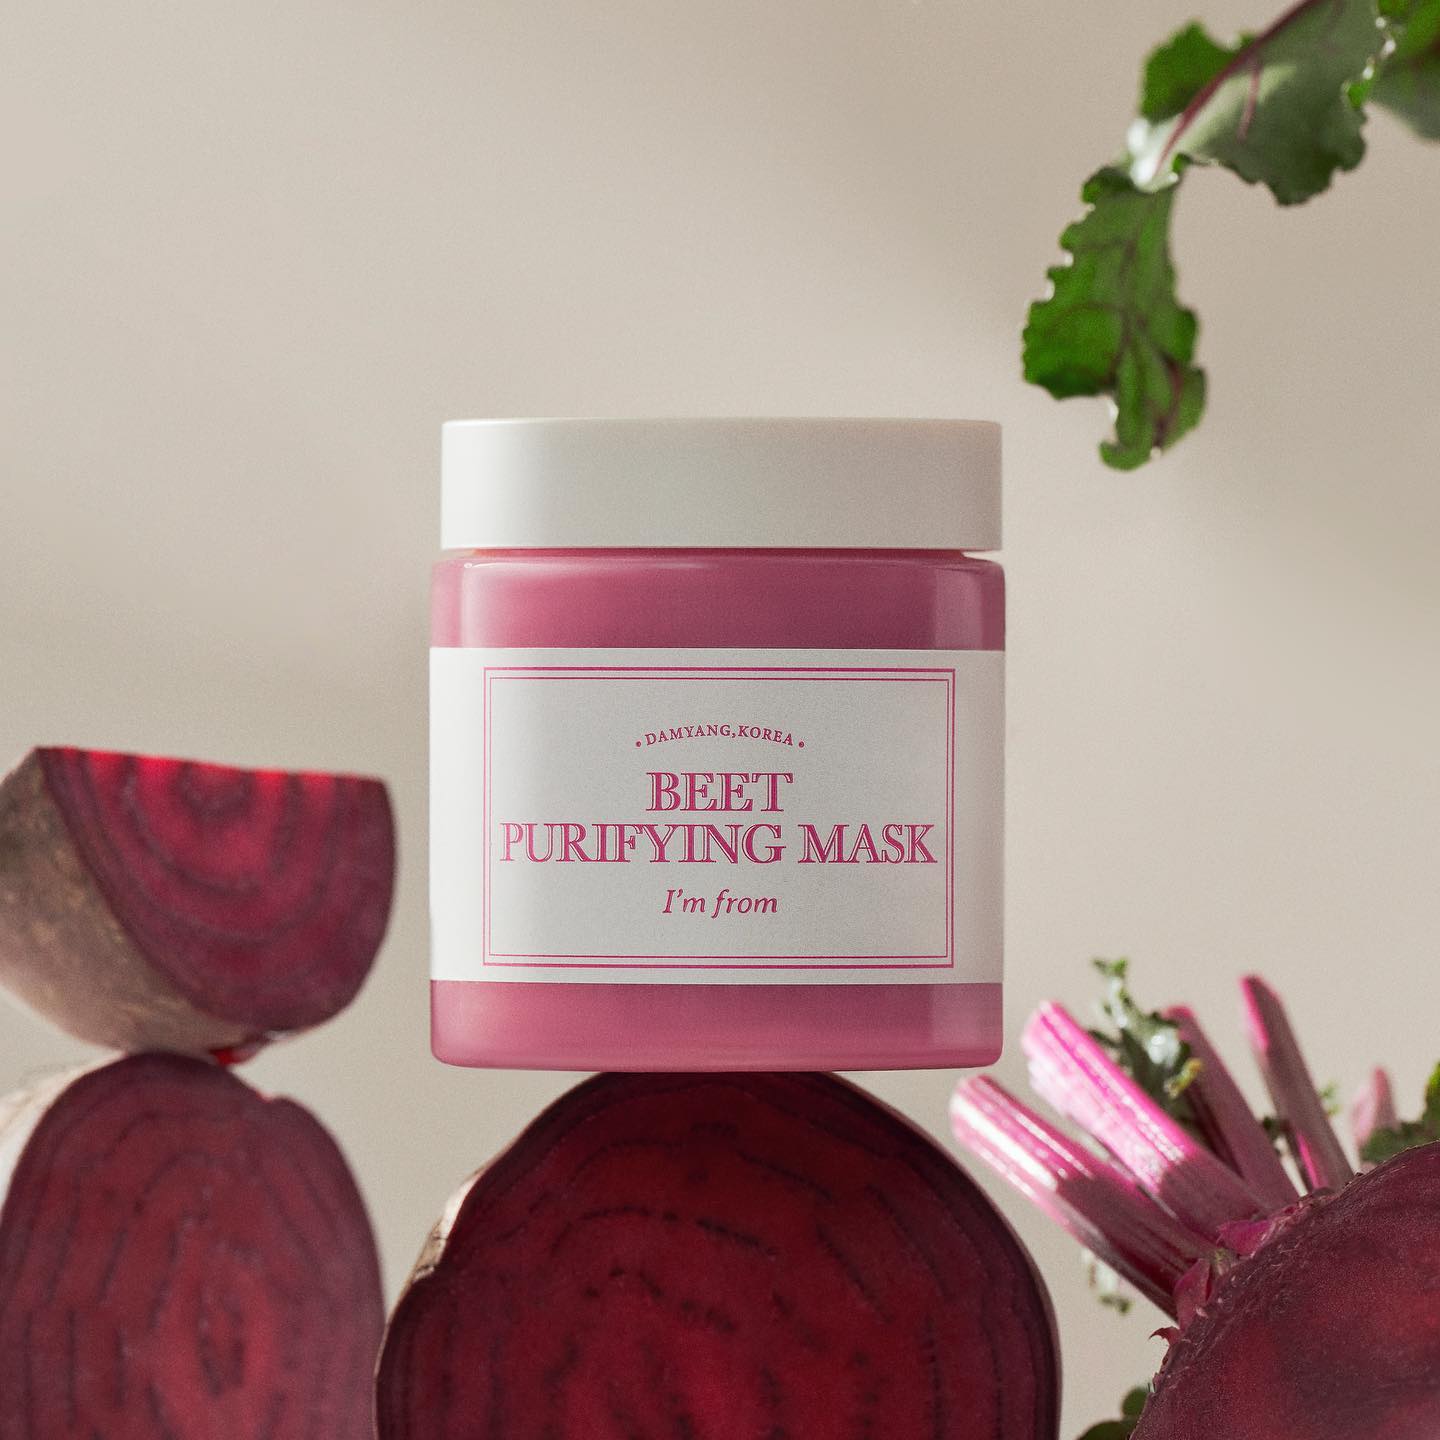 I'm from Beet Purifying Mask 25931354 - фото 2